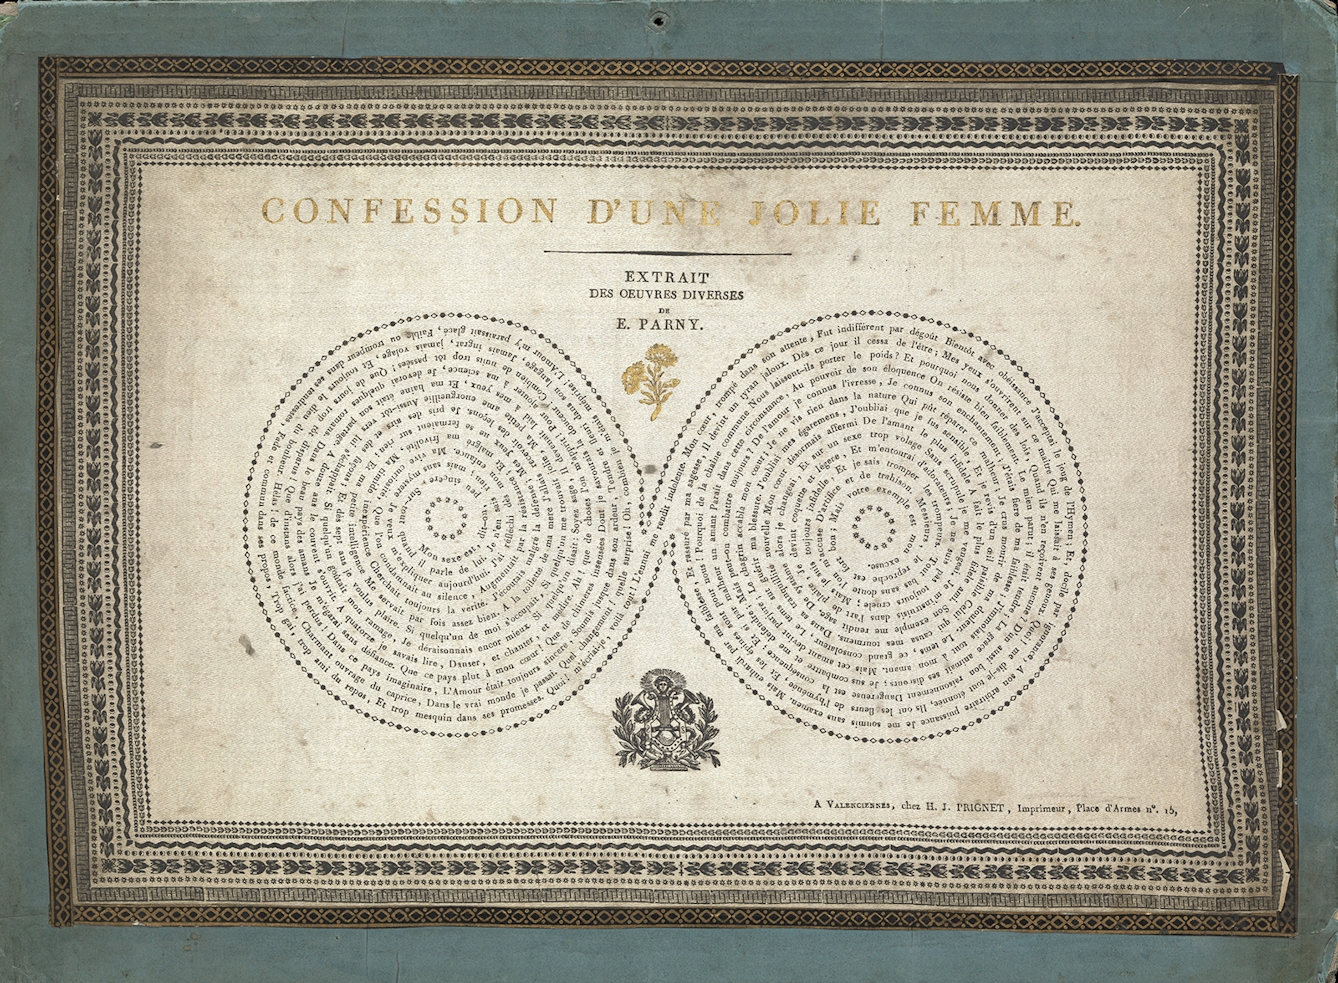 A silk handkerchief printed in black and gold  with words in the form of breasts.